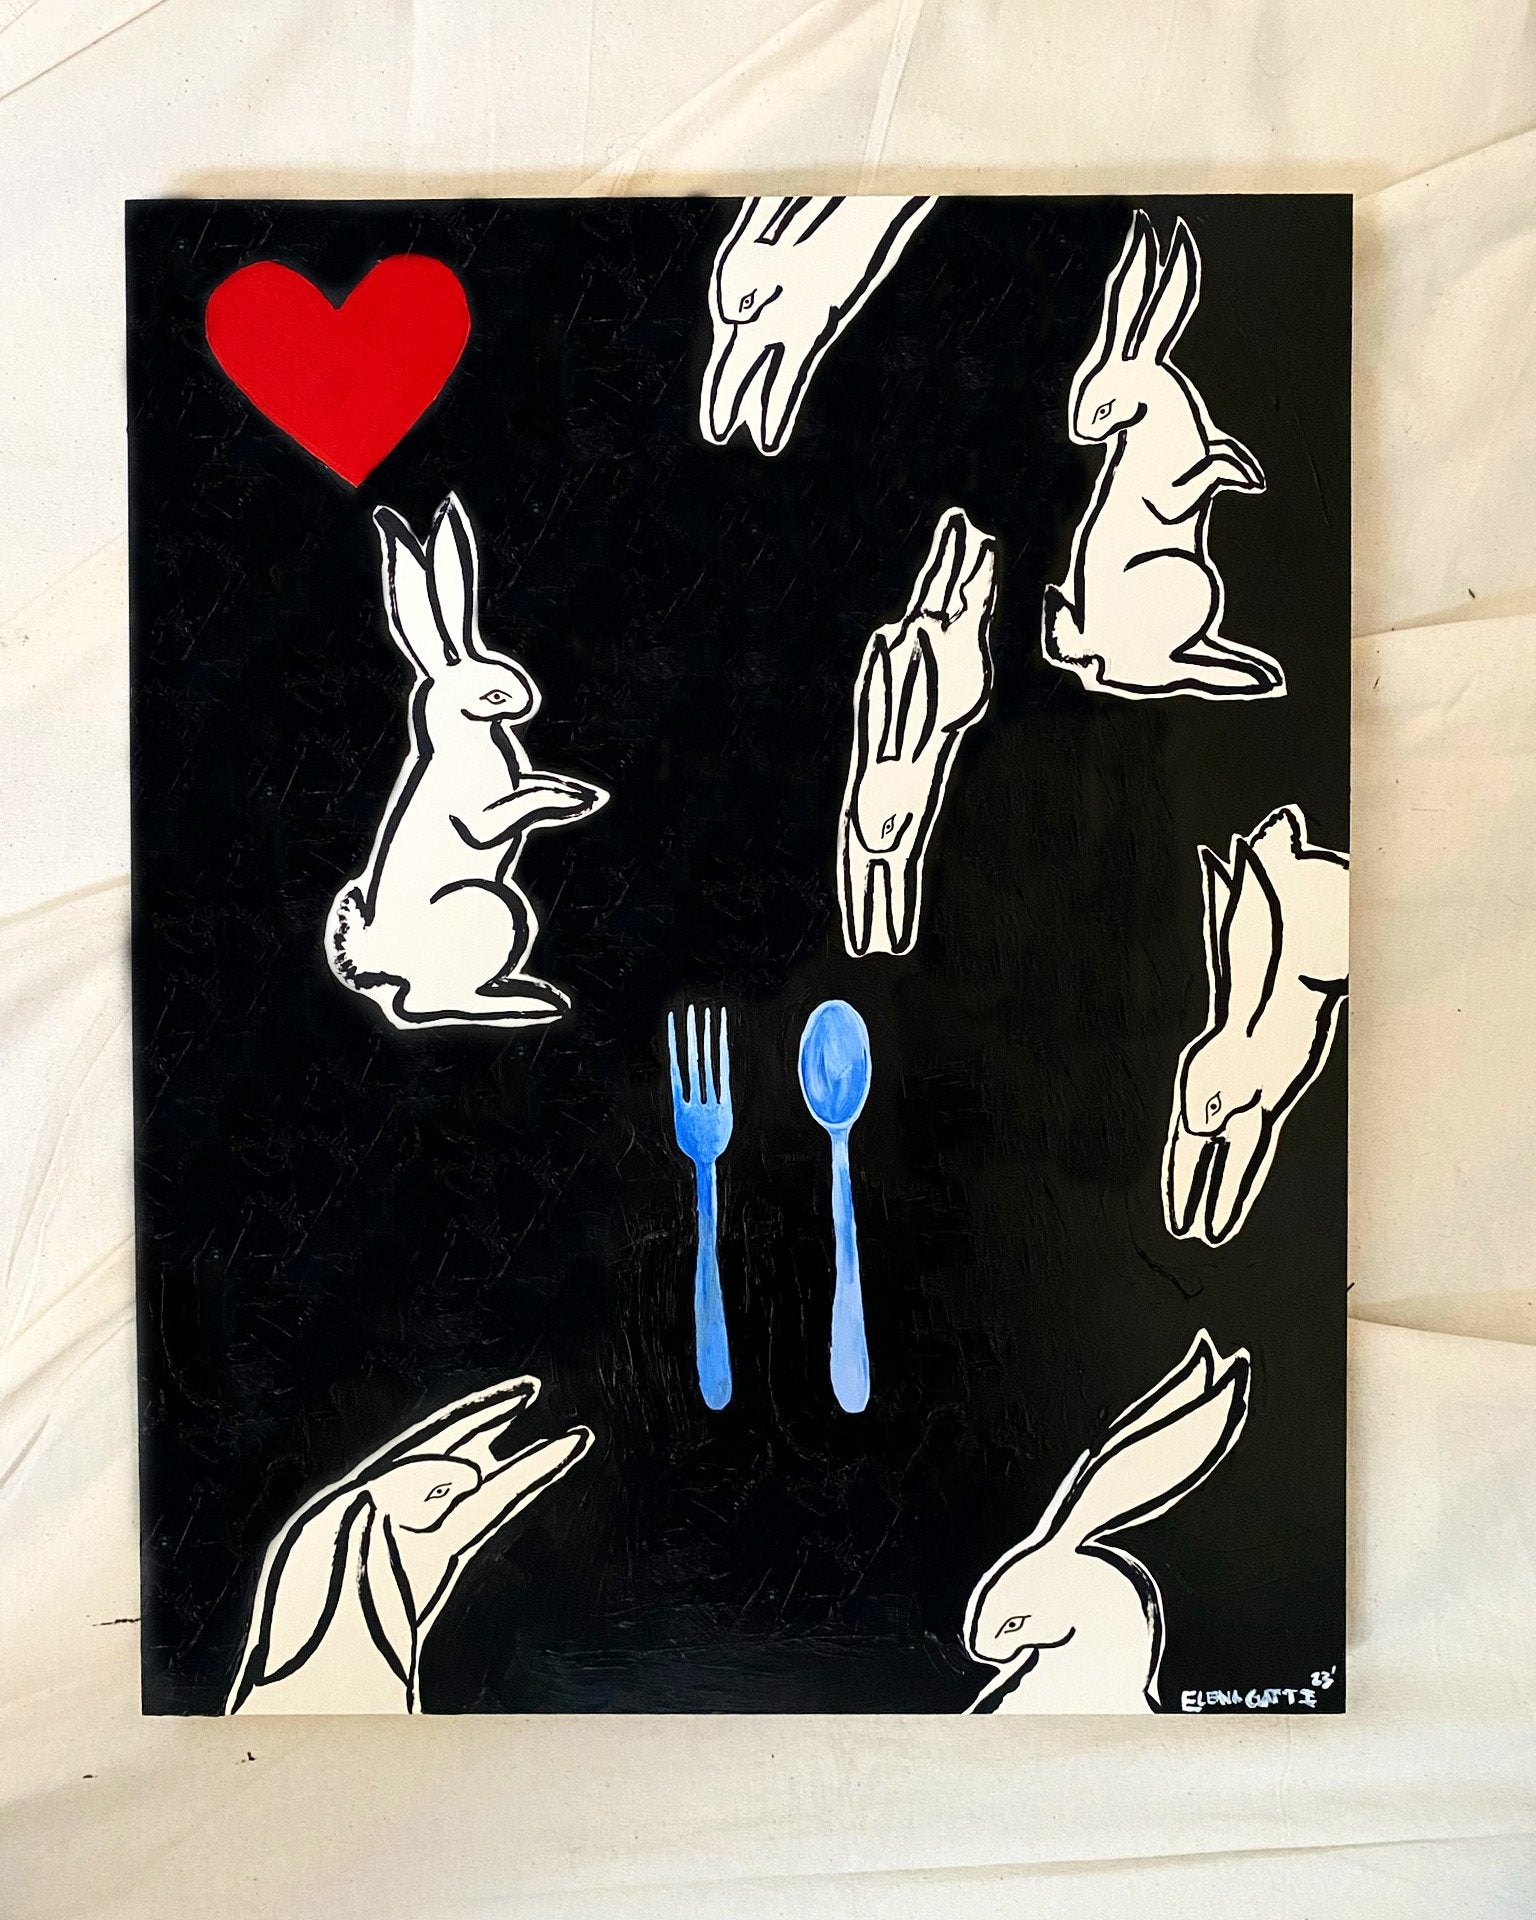 image of several bunnies in different positions. In the center of the canvas is a spoon and fork. In the top left corner is a heart